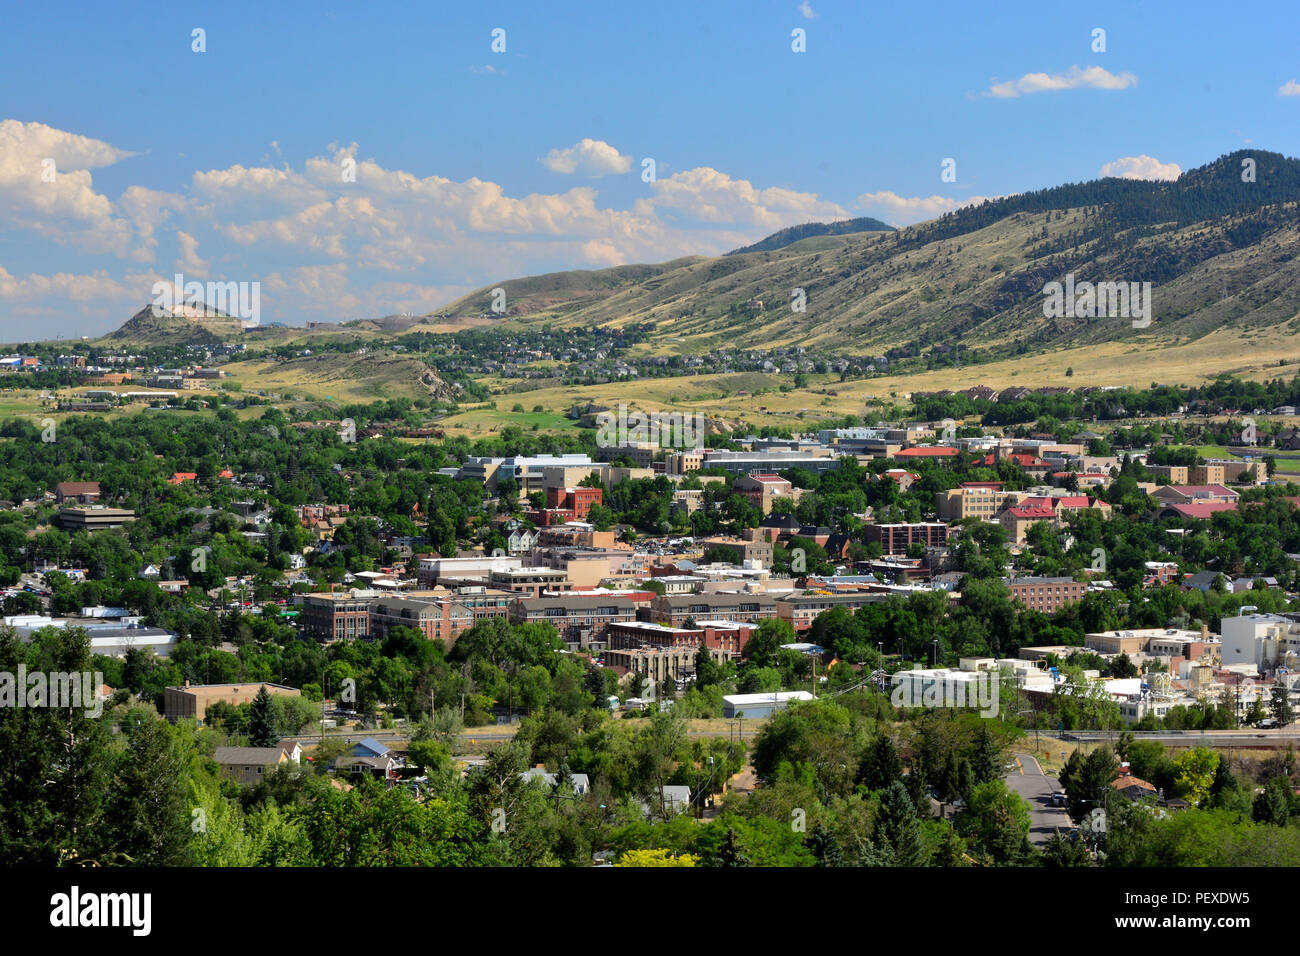 Downtown Golden, Colorado in the Rocky Mountains on a sunny day Stock Photo